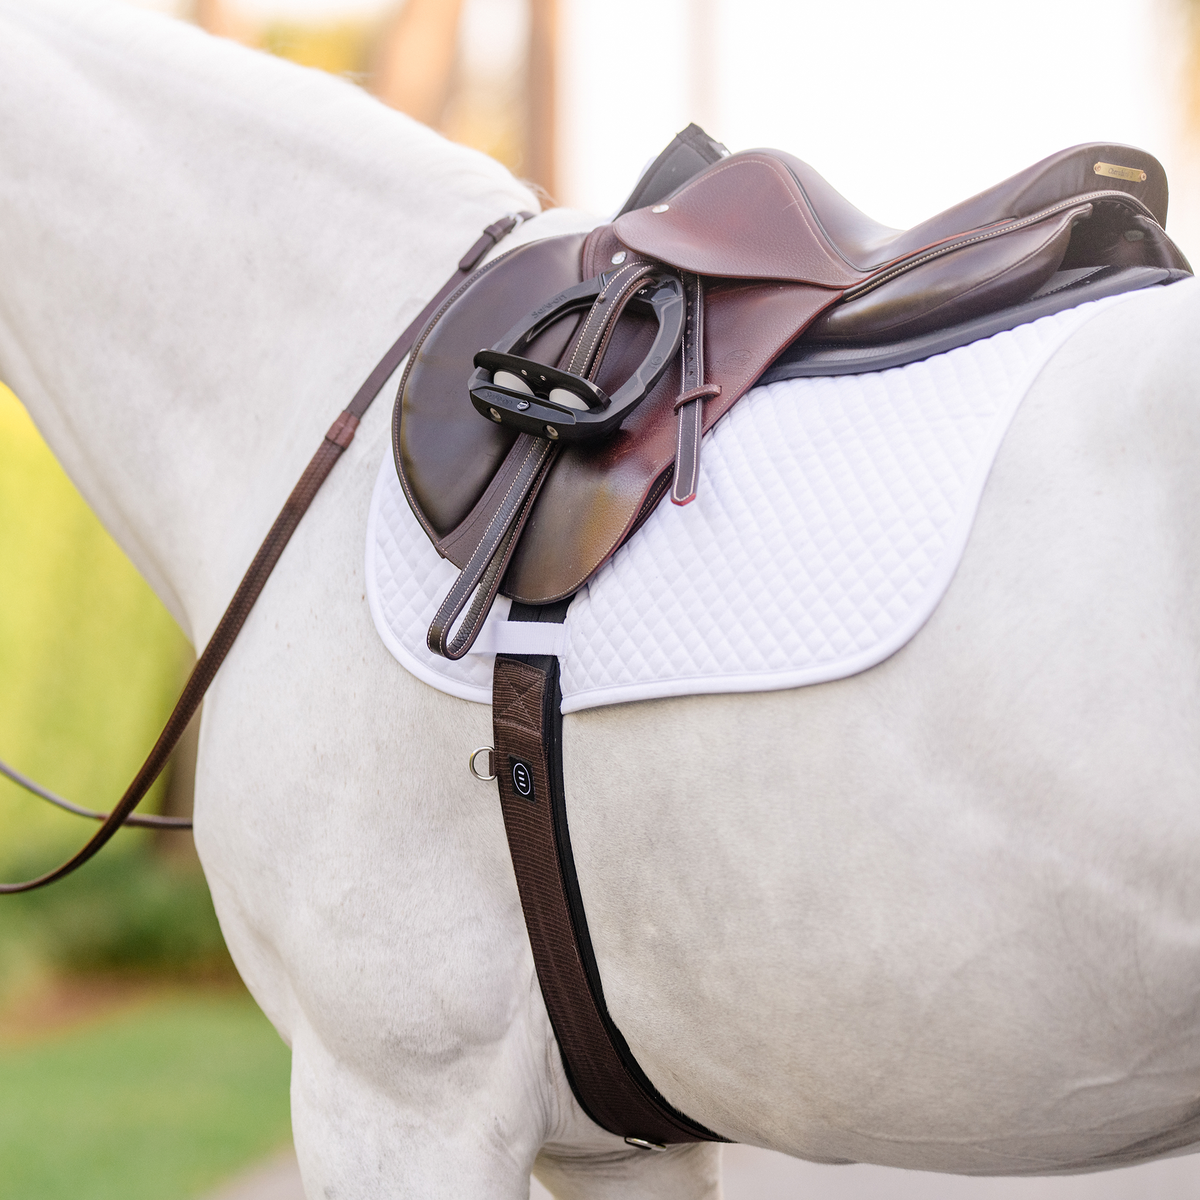 EQUIFIT ESSENTIAL®SCHOOLING GIRTH